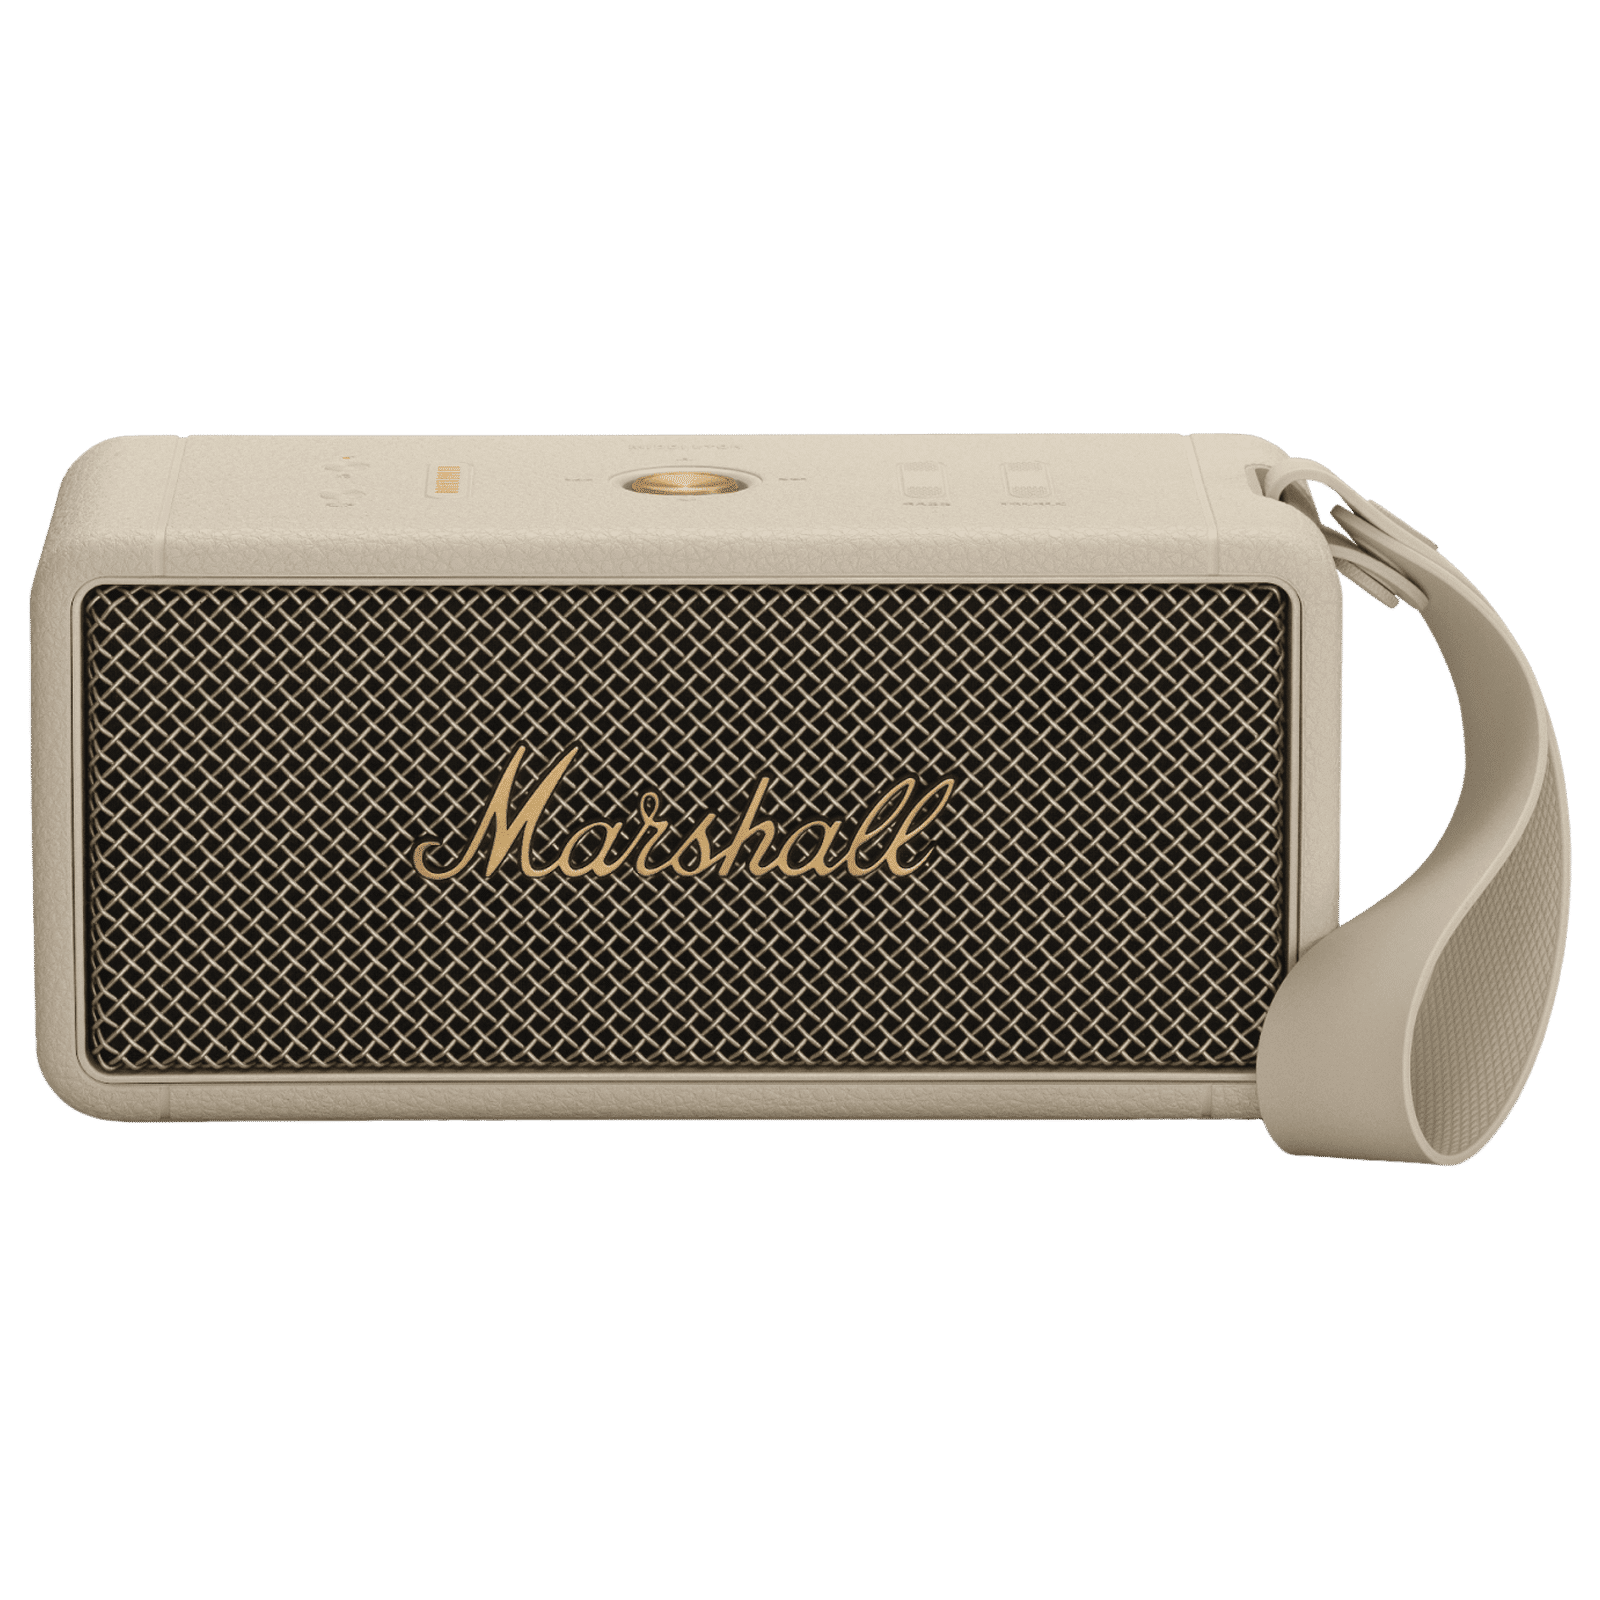 (IP67 Portable Channel, Resistant, Stereo Marshall Online 20 Speaker Bluetooth - Buy Cream) Plus Middleton Playtime, Water Croma Hours